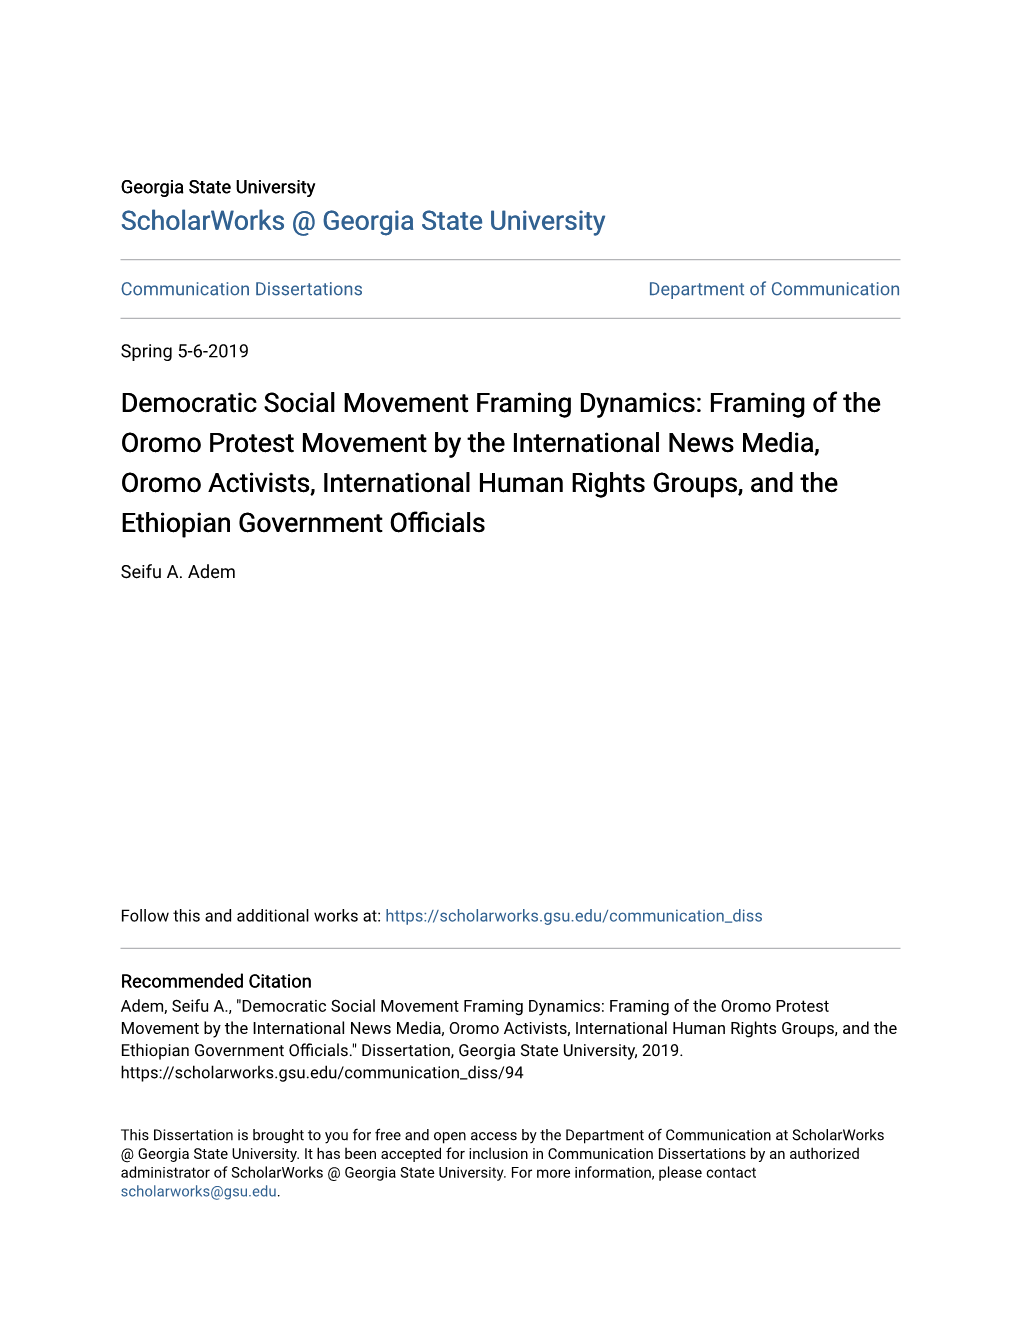 Framing of the Oromo Protest Movement by the International News Media, Oromo Activists, International Human Rights Groups, and the Ethiopian Government Officials